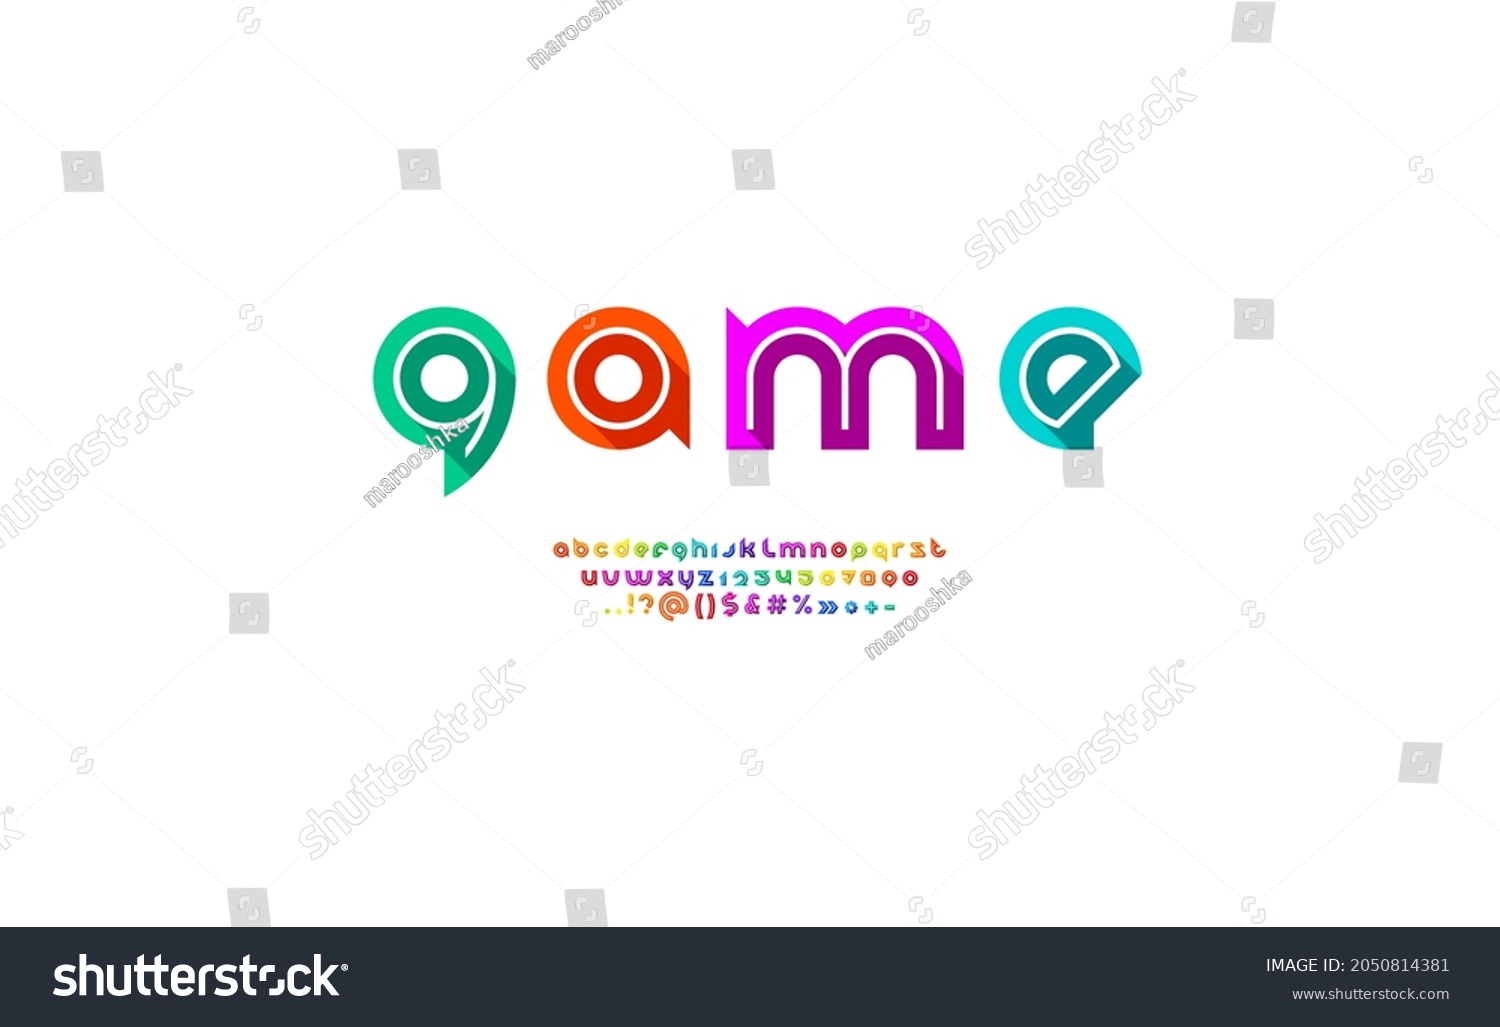 SVG of Kids bright font, child rounded modern alphabet, trendy multi colored letters A, B, C, D, E, F, G, H, I, J, K, L, M, N, O, P, Q, R, S, T, U, V, W, X, Y, Z and numbers 0, 1, 2, 3, 4, 5, 6, 7, 8, 9 svg